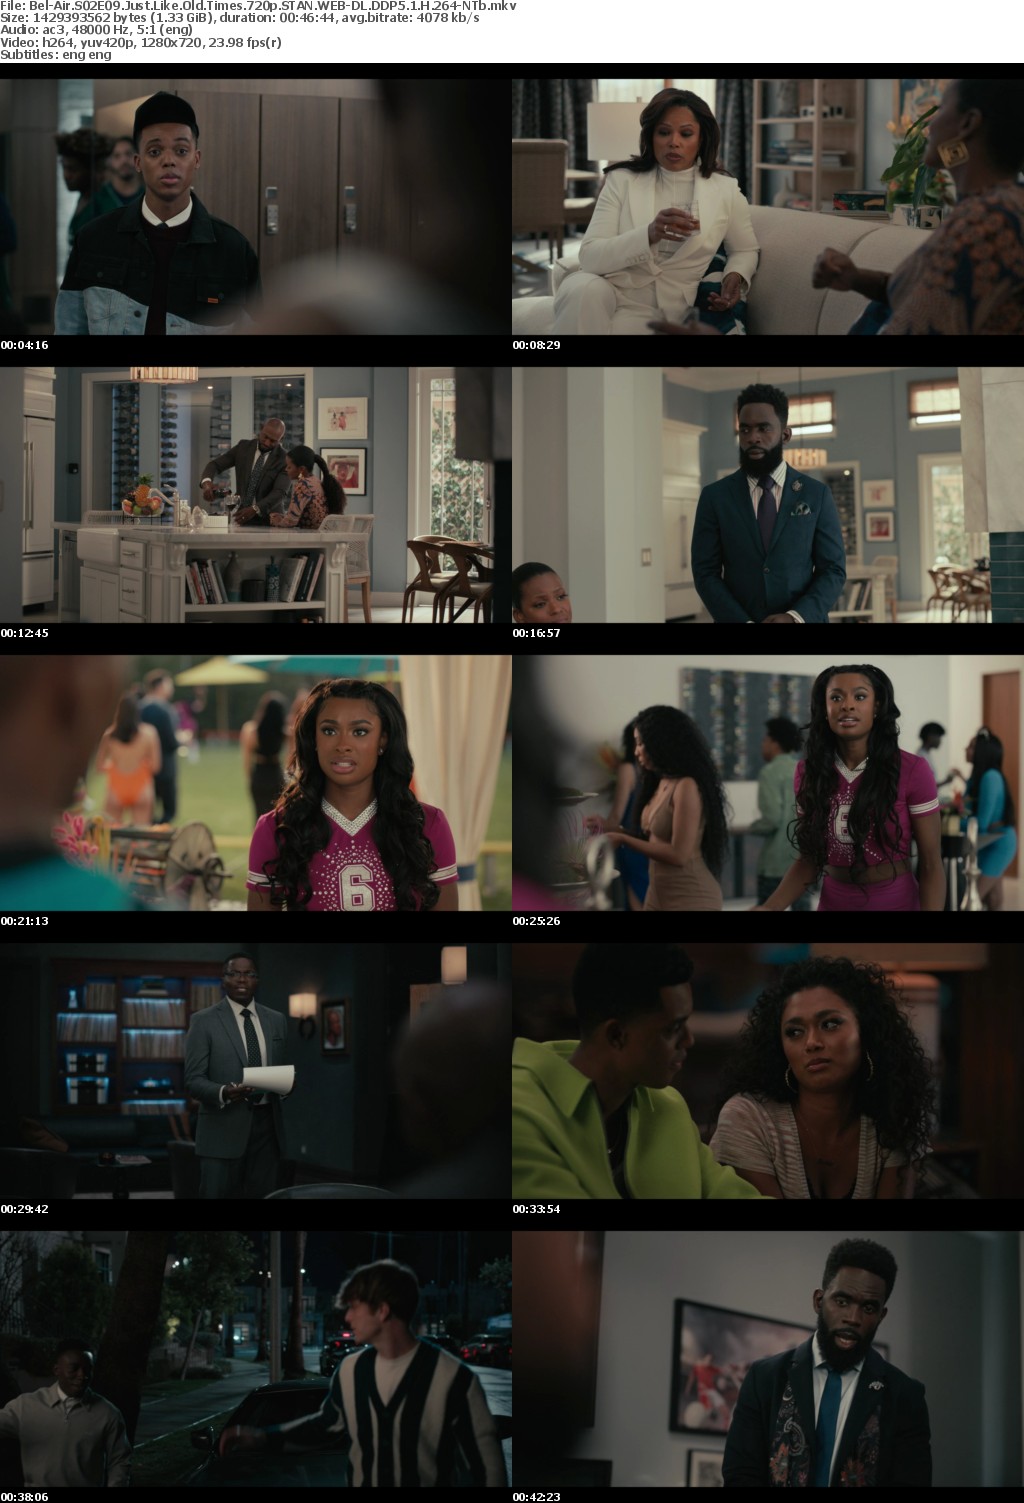 Bel-Air S02E09 Just Like Old Times 720p STAN WEBRip DDP5 1 x264-NTb